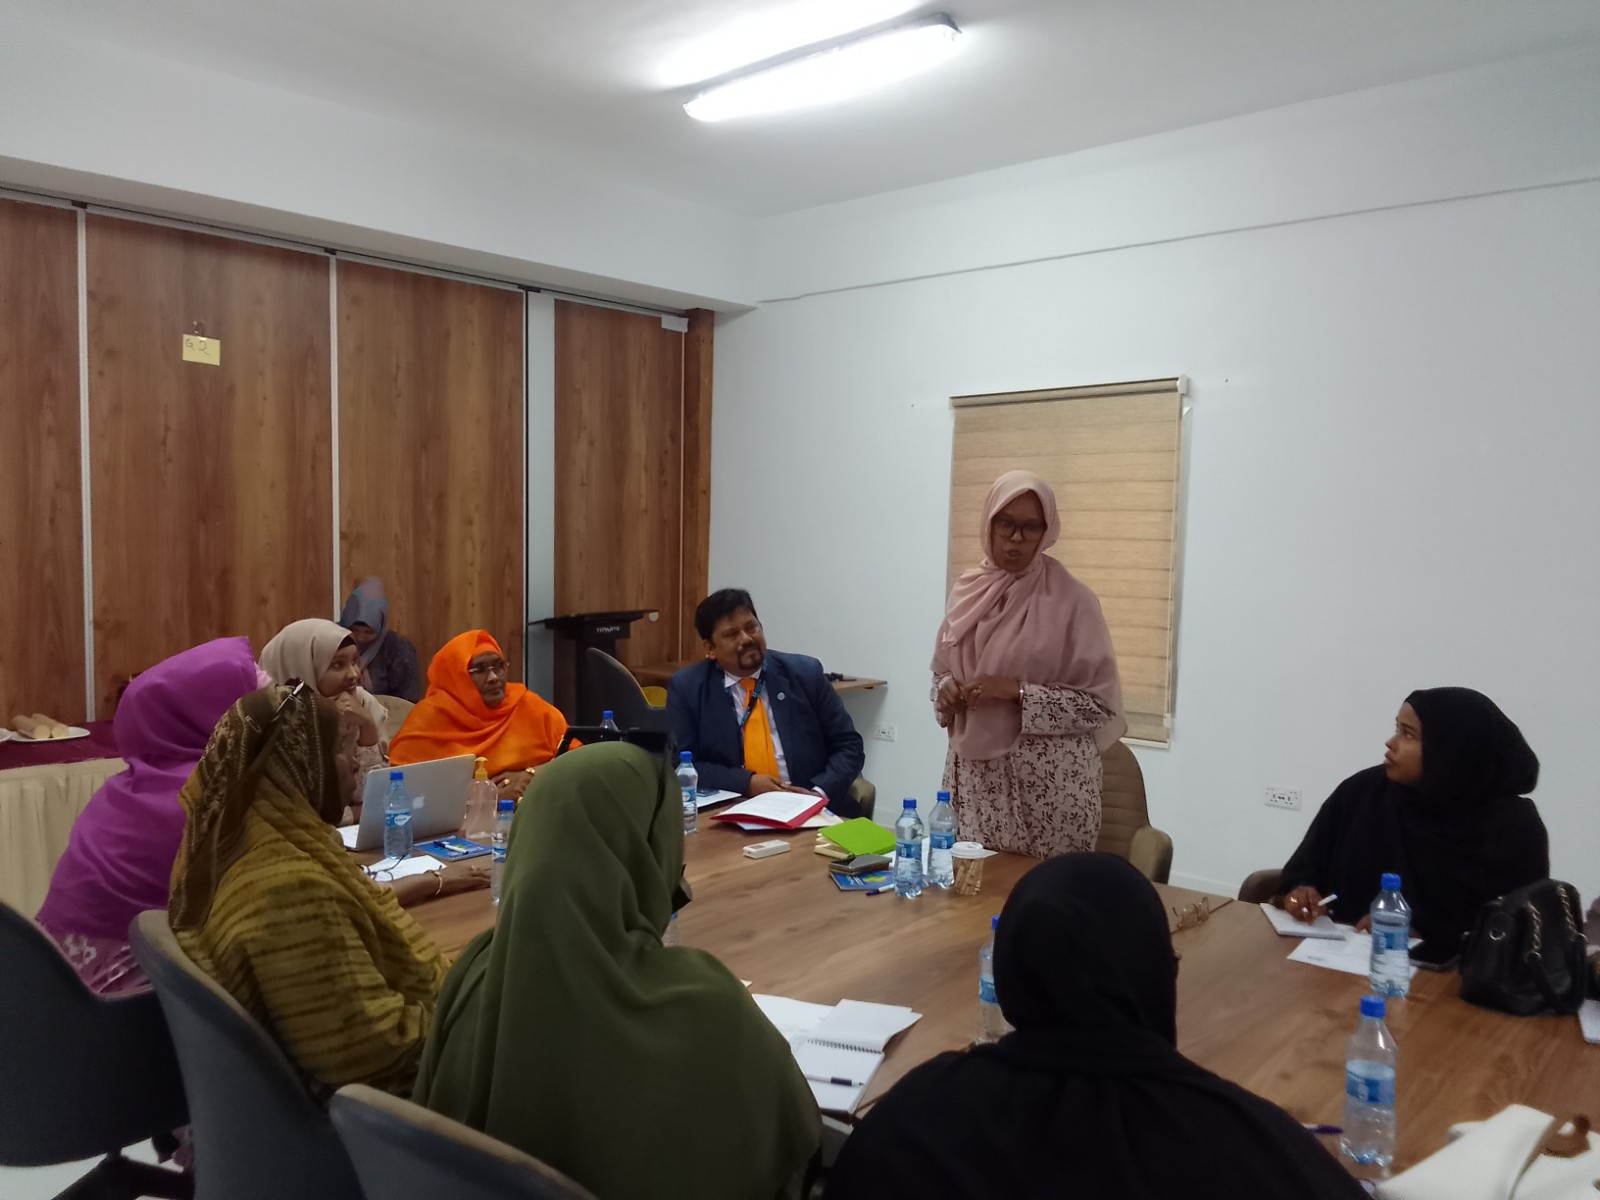 Hon. Minister Ubah Hussein from Ministry of Women Human Right Developme, Galmudug addressing members of Parliament from Hirshabelle and Galmudug State on the establishment of the PWC at FMS level..jpg